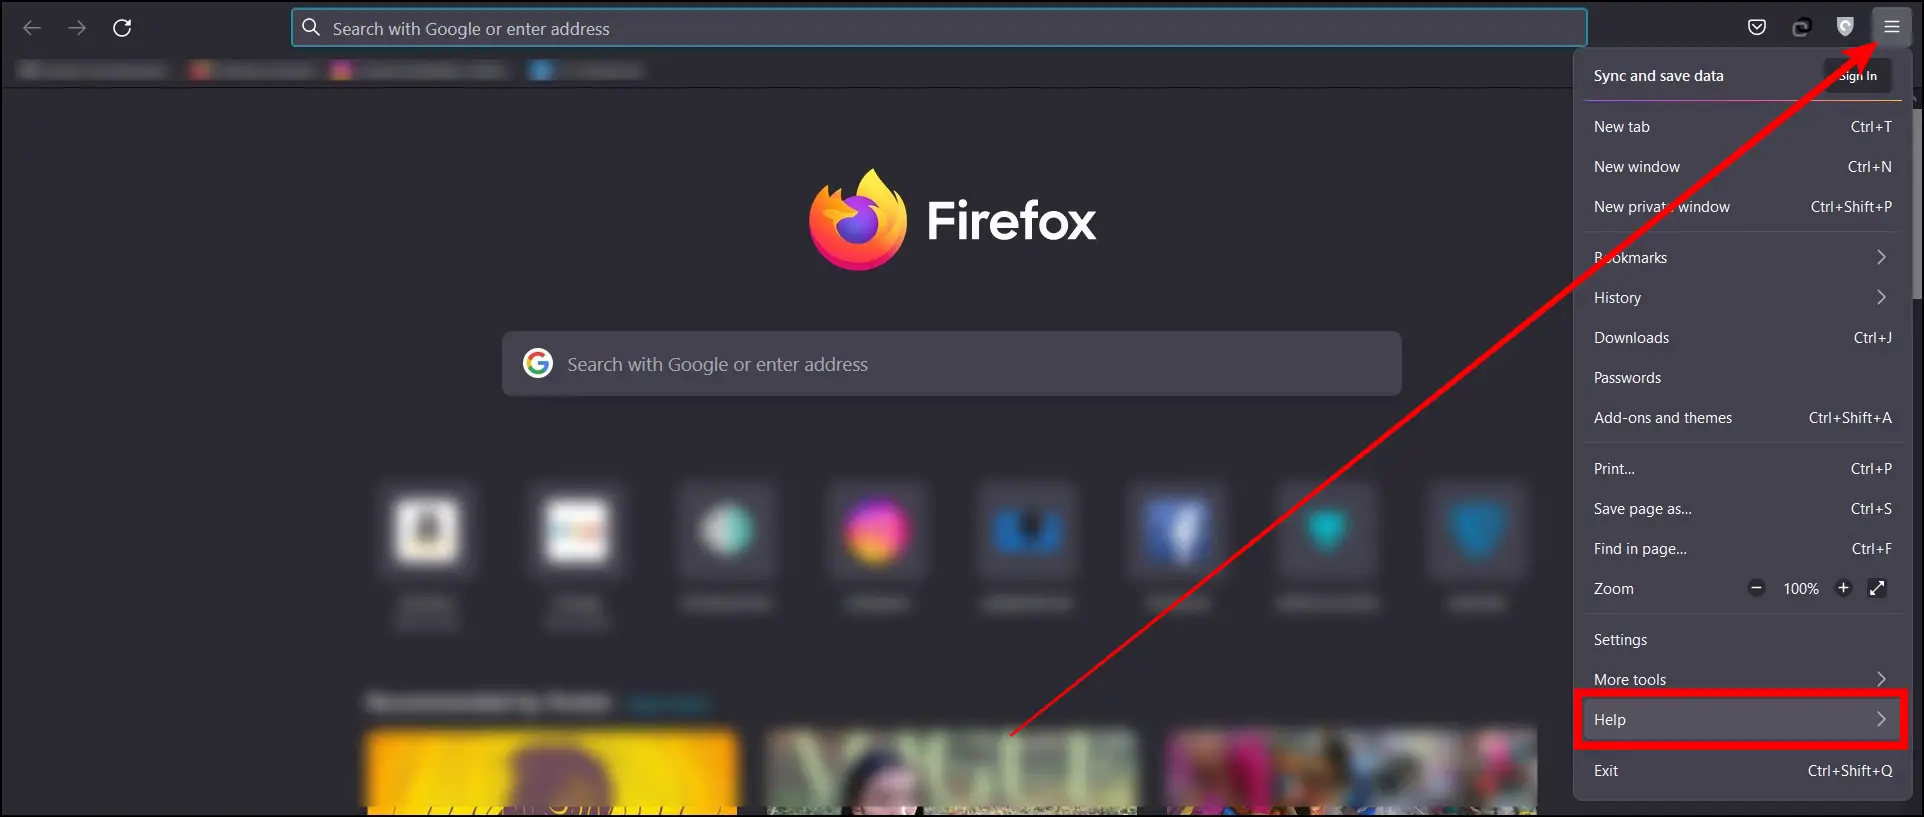 Check Your Current Firefox Version on PC